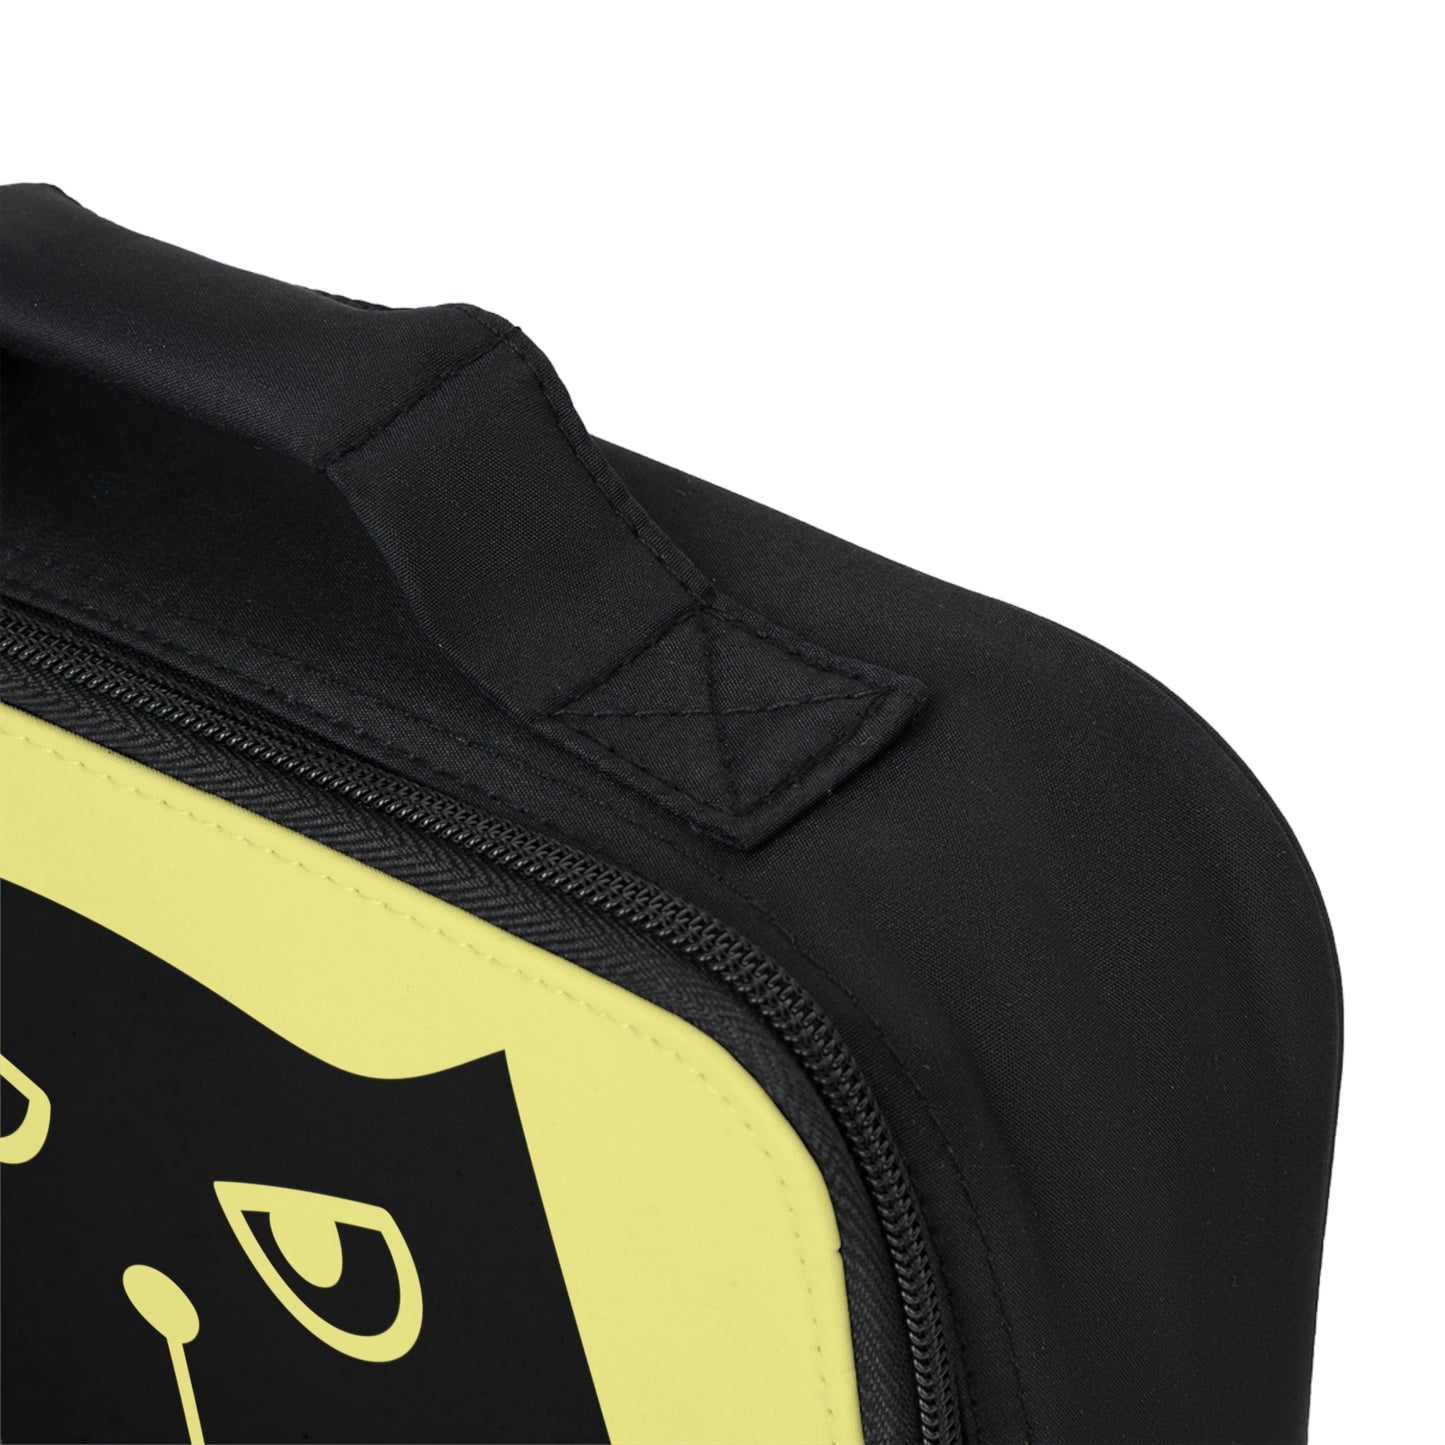 Black cat says "pet if you can" yellow Lunch Bag